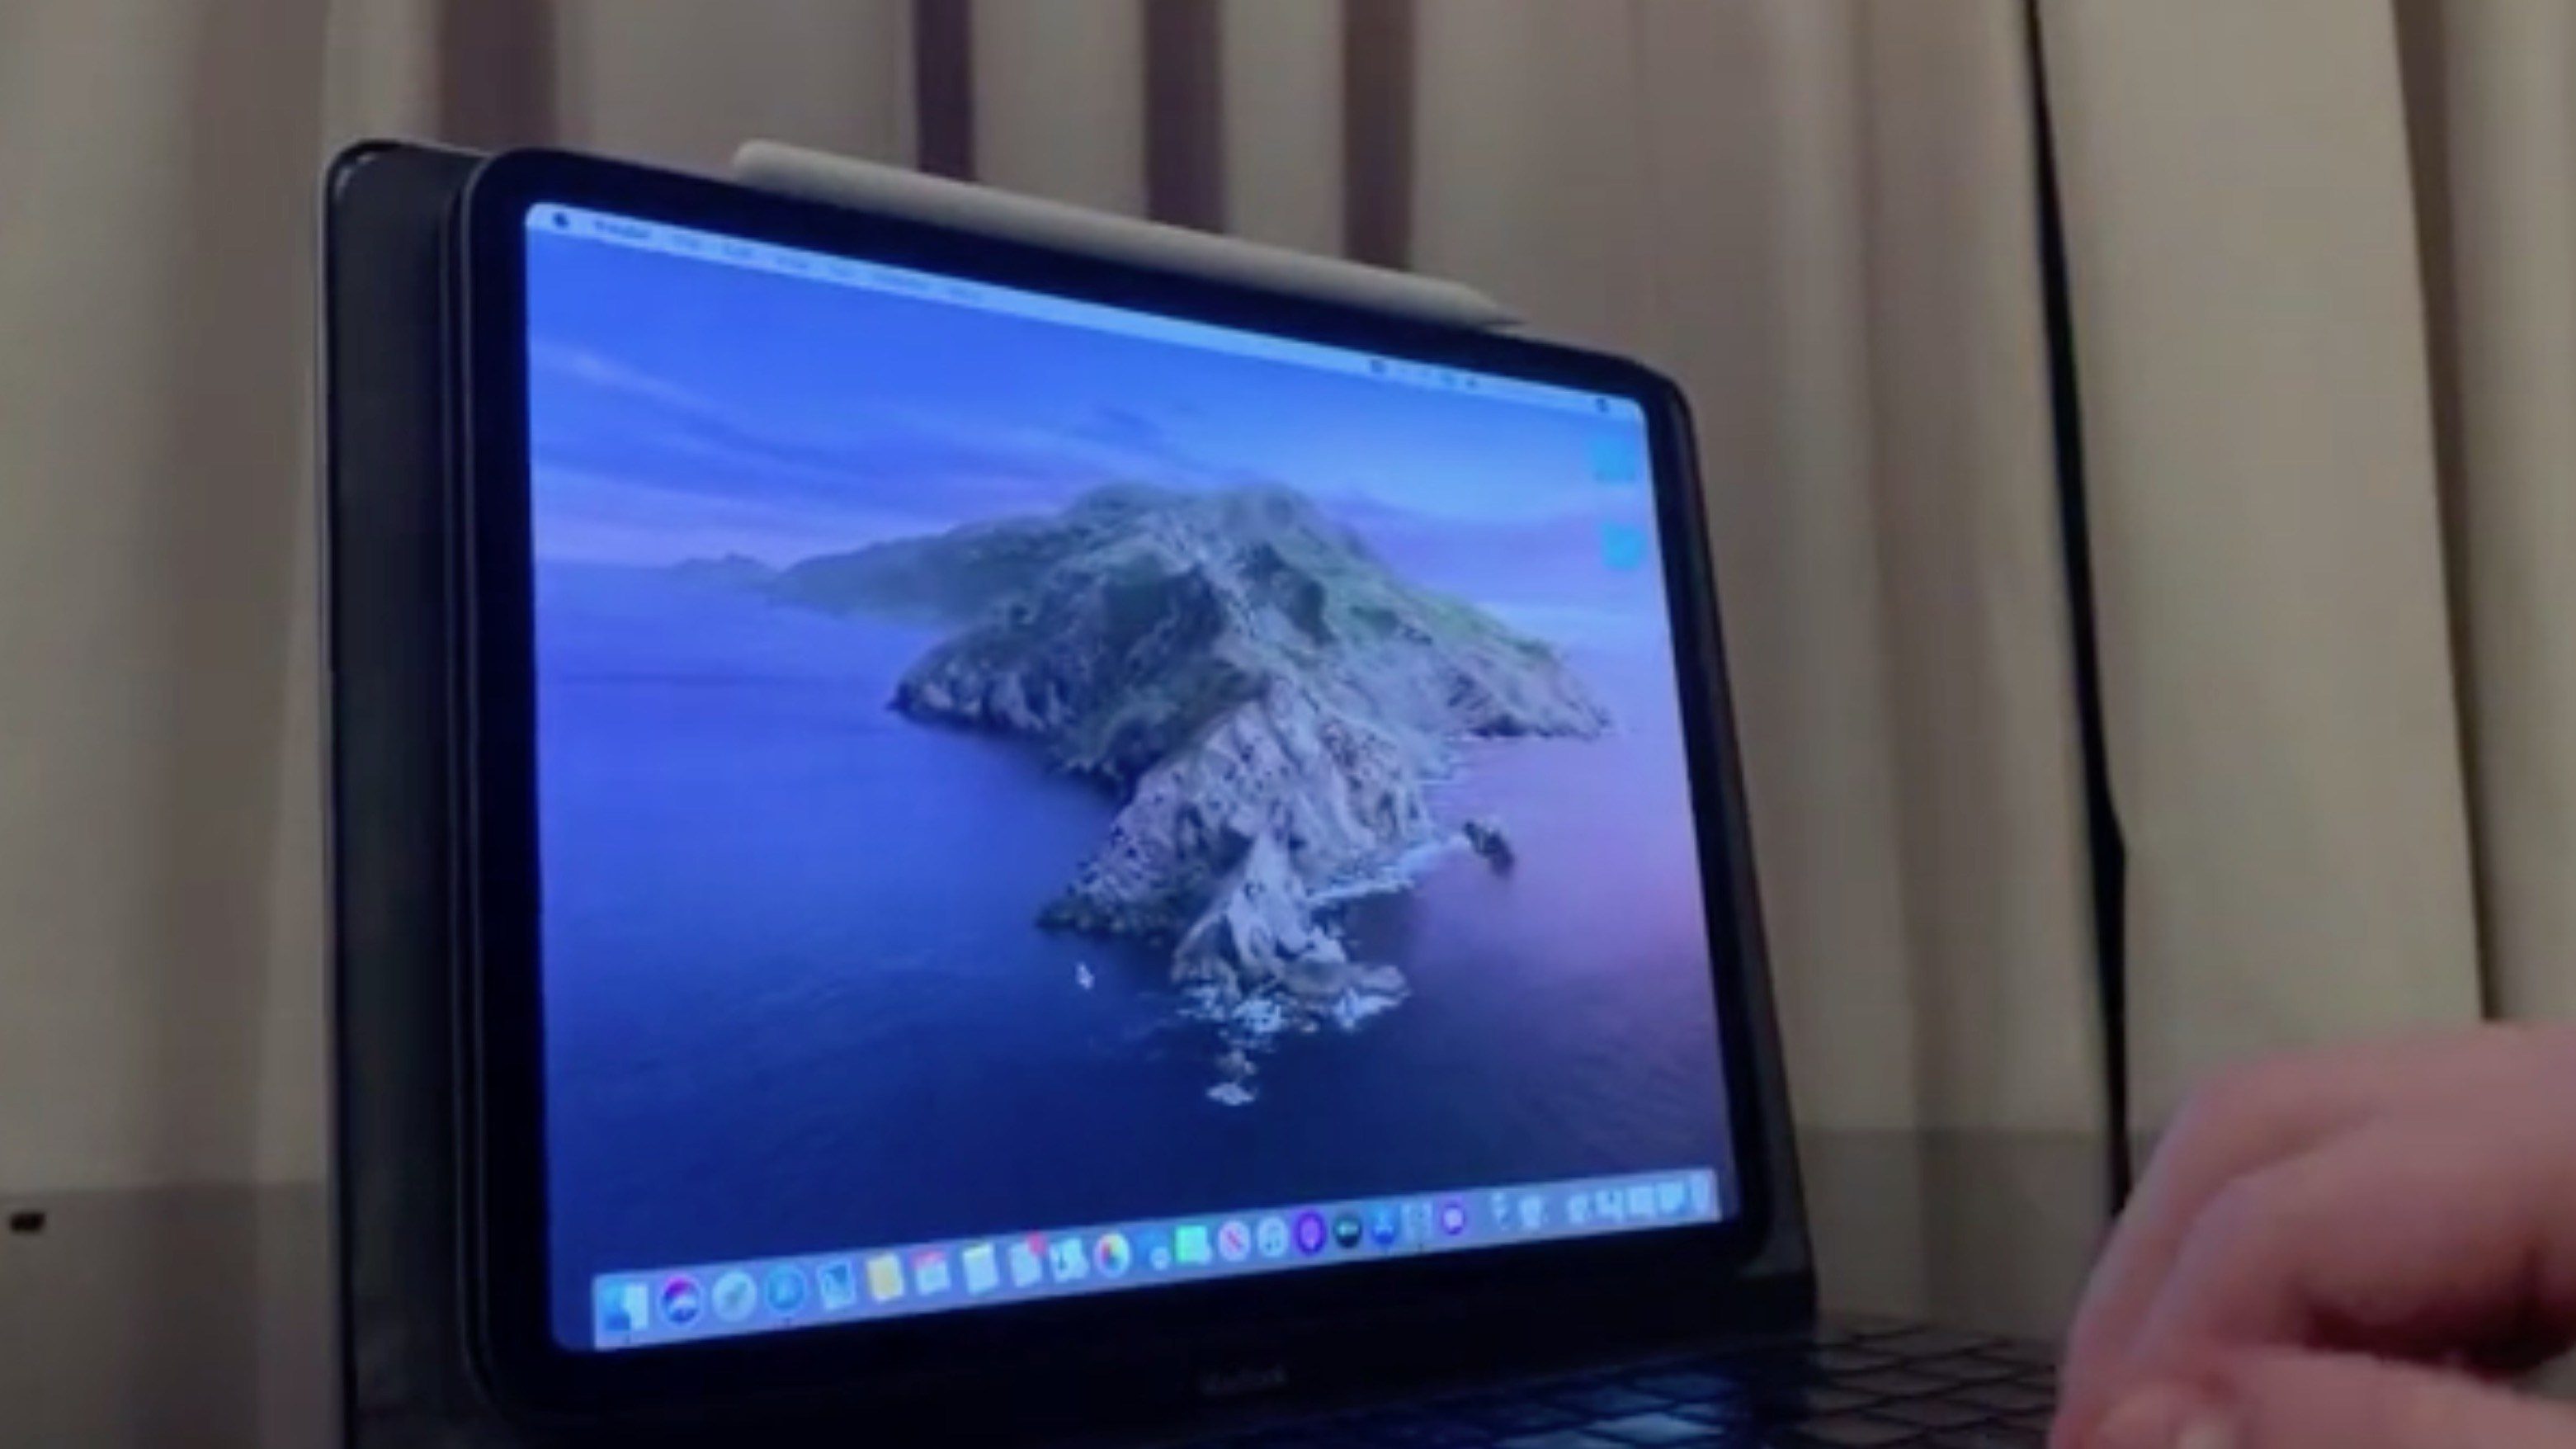 Redditor Turns Busted Macbook Pro into a Clever Mac + Ipad Hybrid